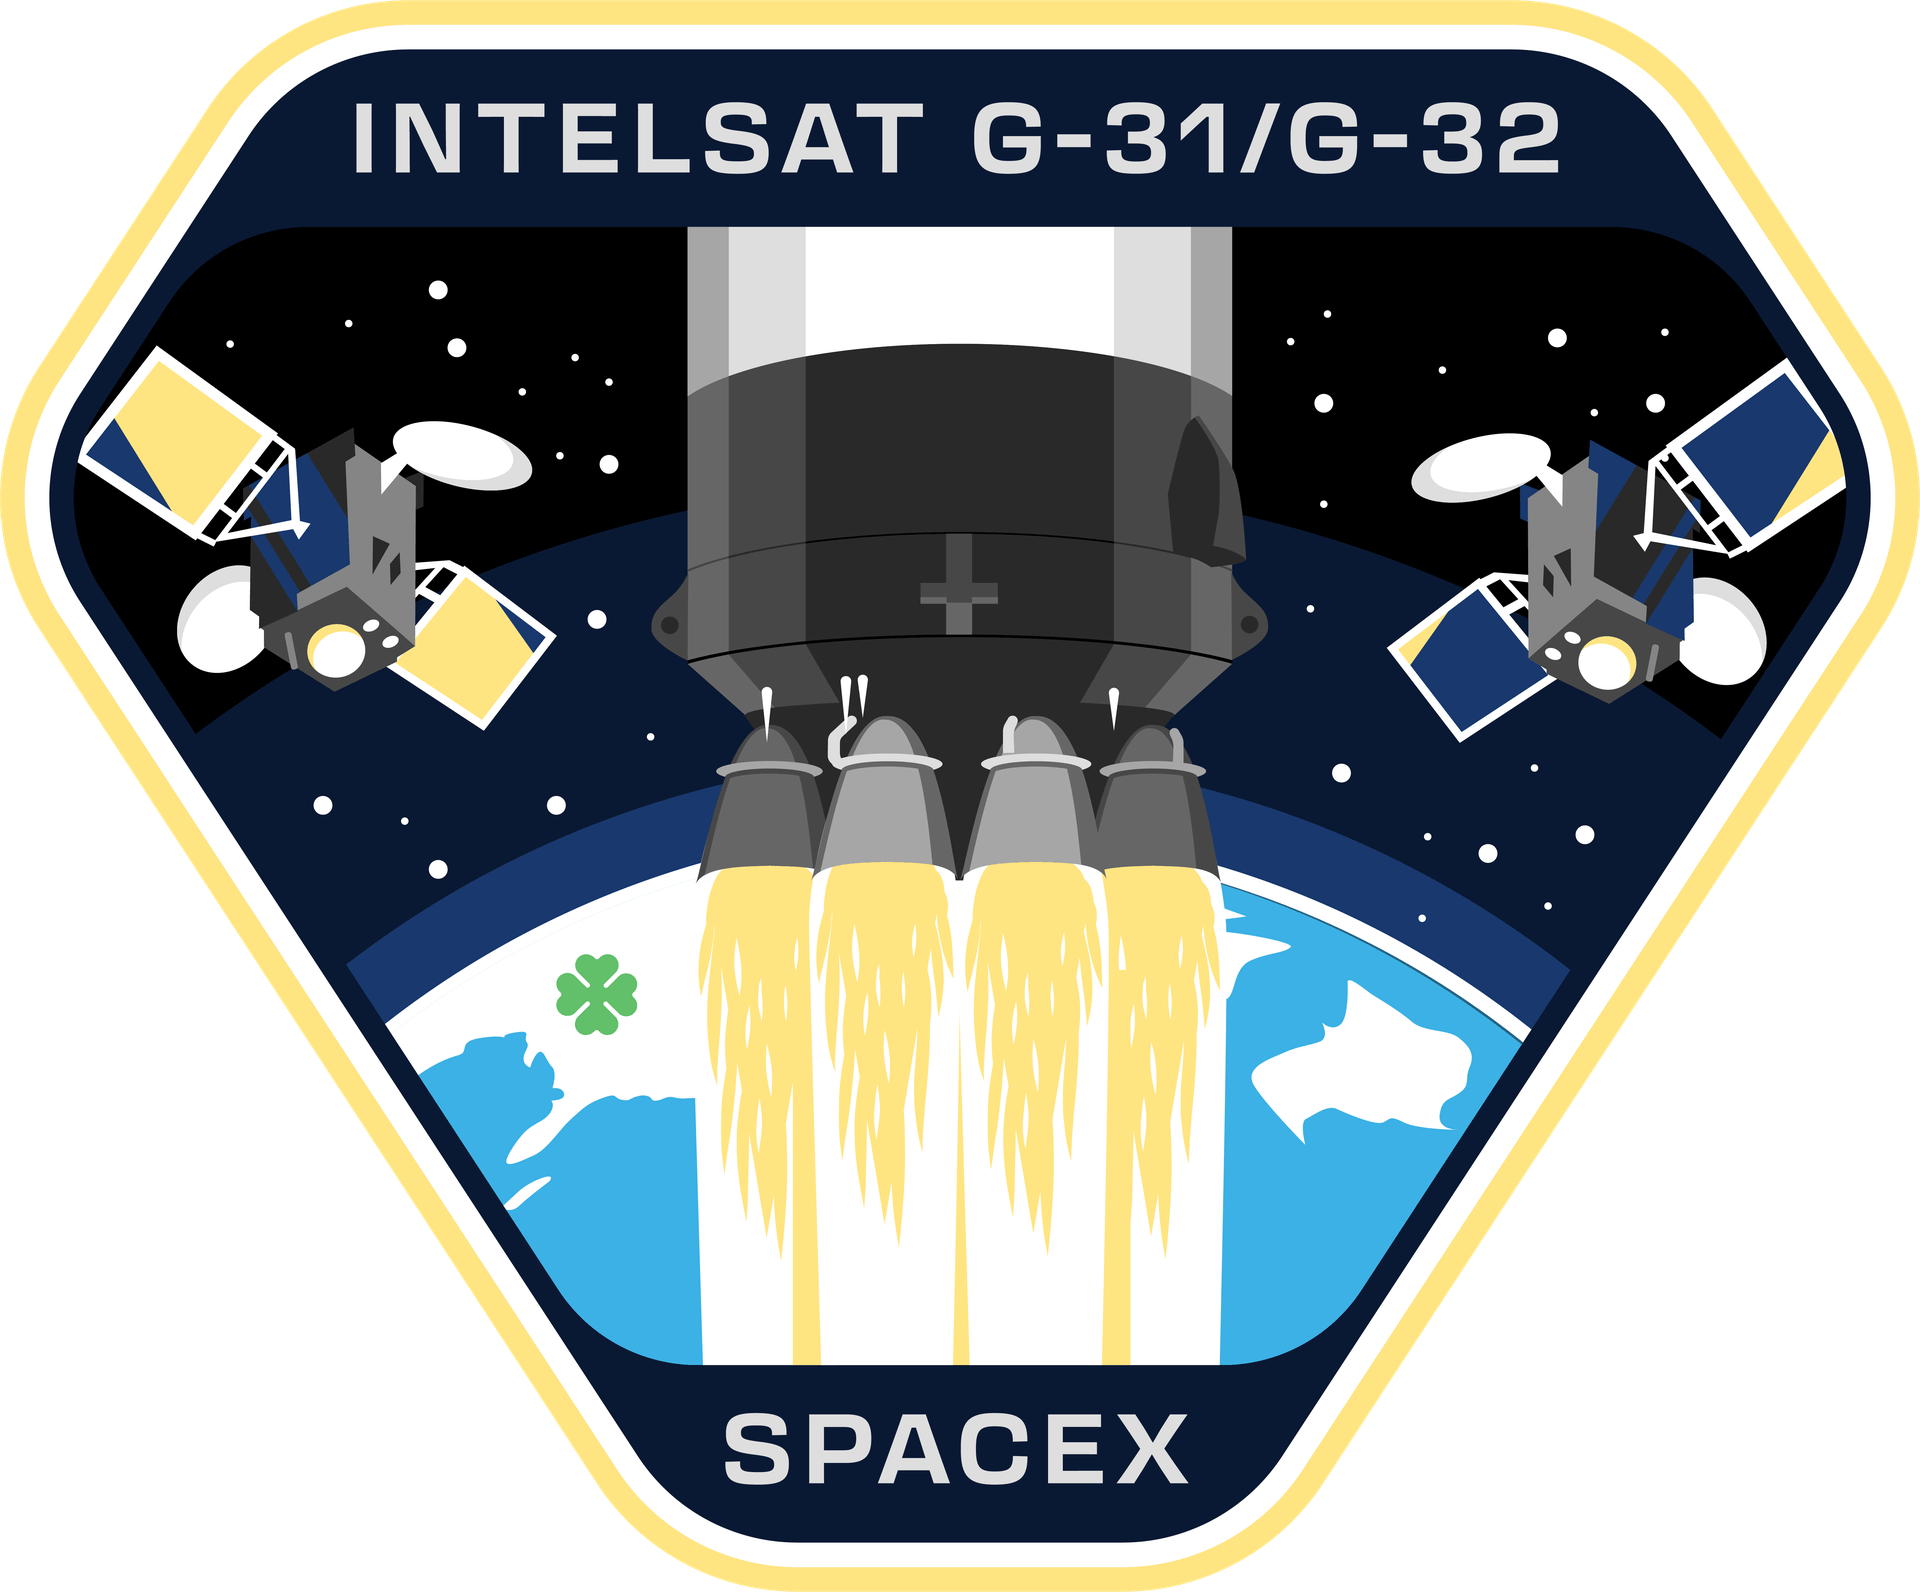 Mission patch for Galaxy 31 & 32